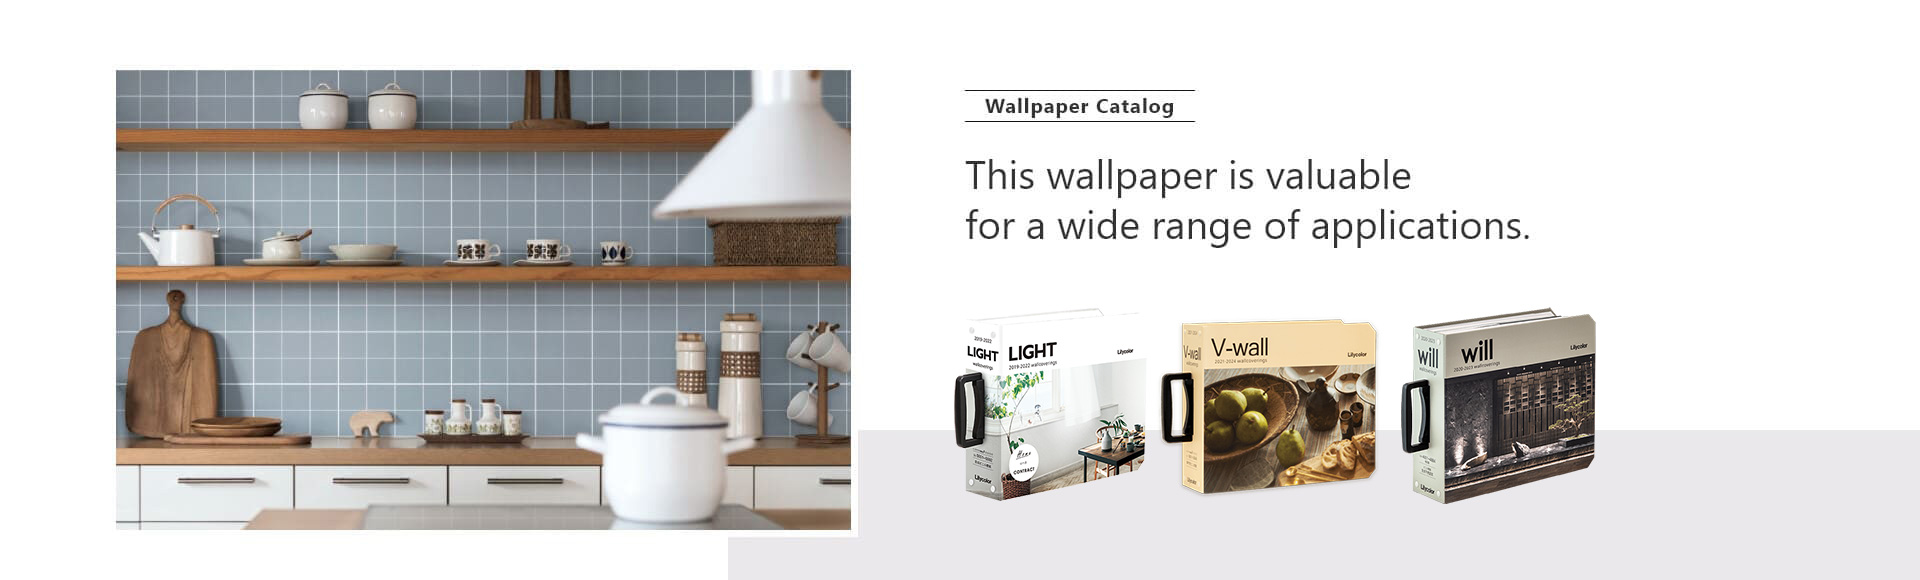 Wallpaper Catalog: This wallpaper is valuable for a wide range of applications.